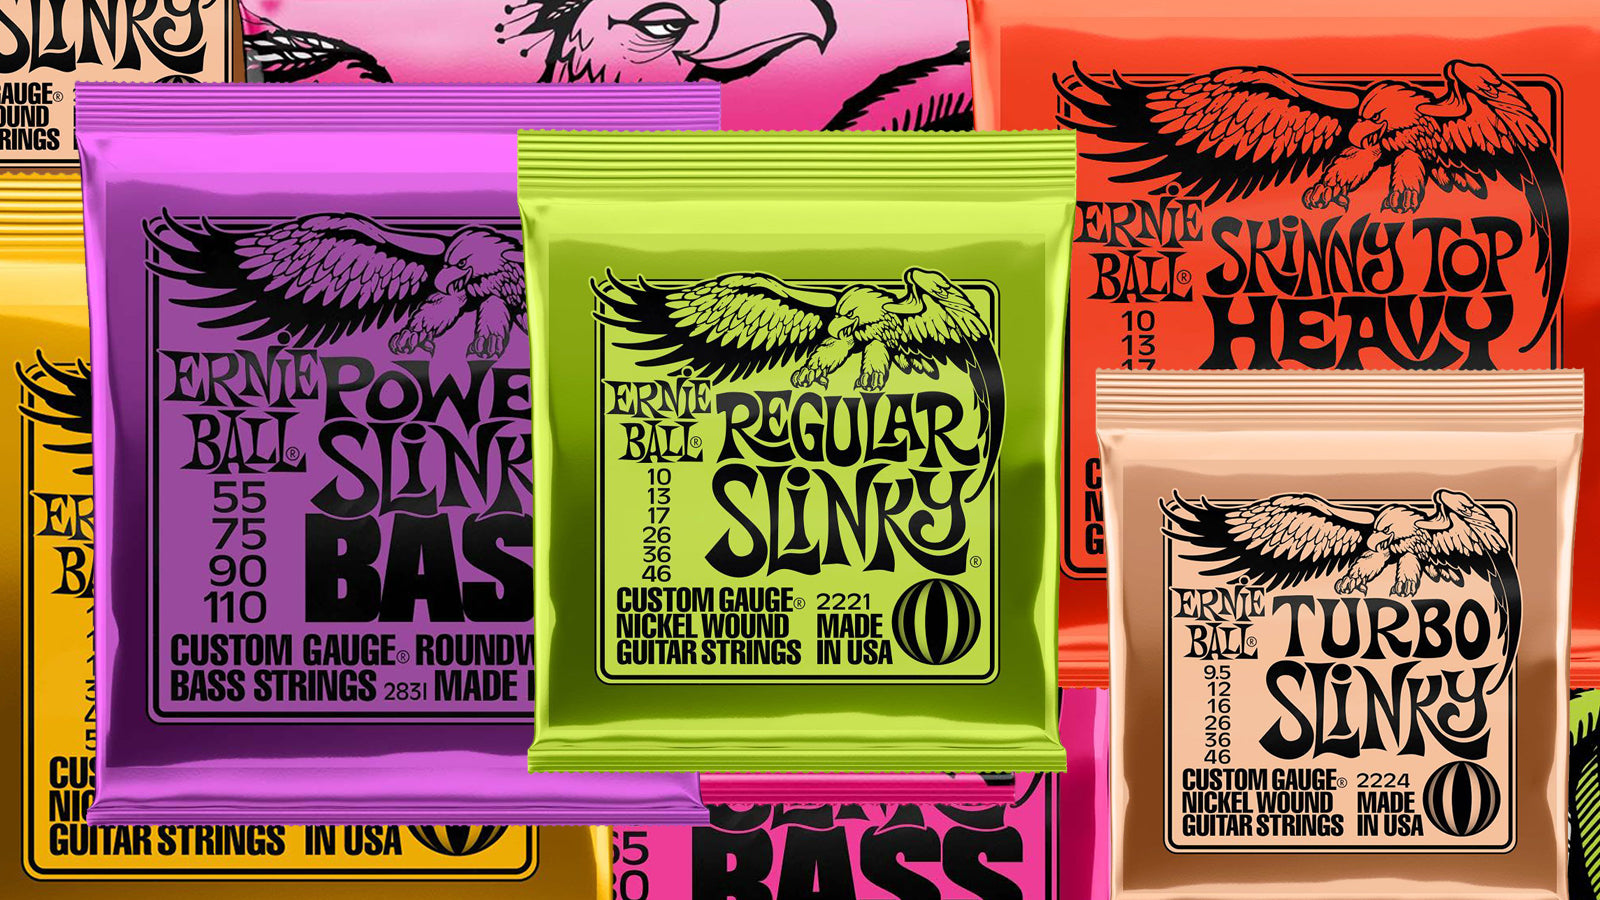 A collage of Ernie Ball string packages